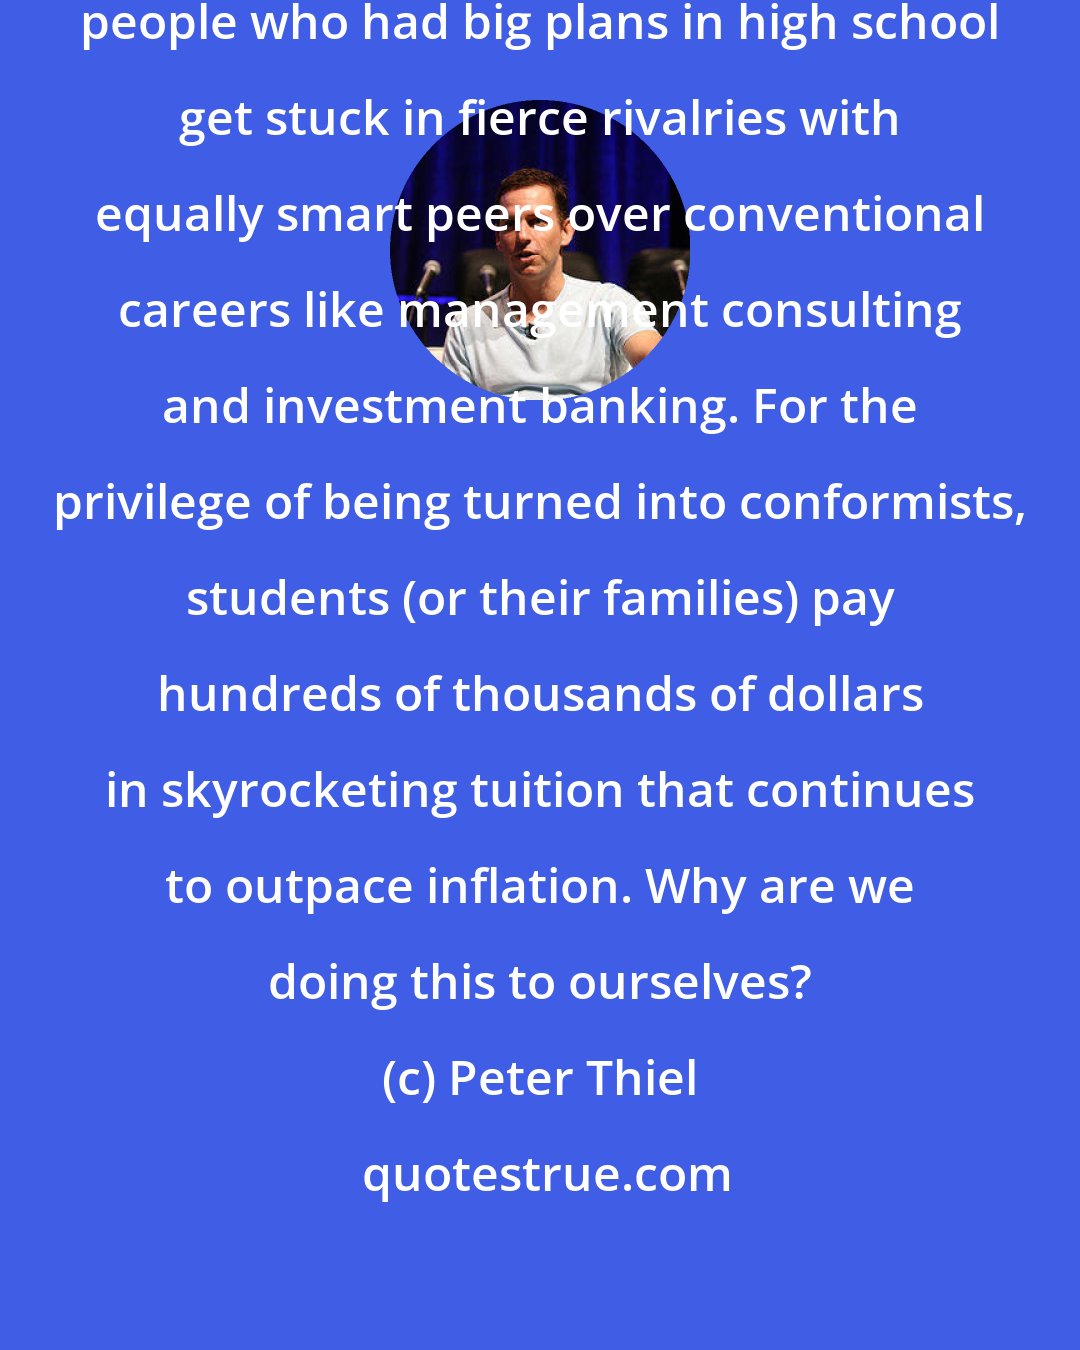 Peter Thiel: Higher education is the place where people who had big plans in high school get stuck in fierce rivalries with equally smart peers over conventional careers like management consulting and investment banking. For the privilege of being turned into conformists, students (or their families) pay hundreds of thousands of dollars in skyrocketing tuition that continues to outpace inflation. Why are we doing this to ourselves?